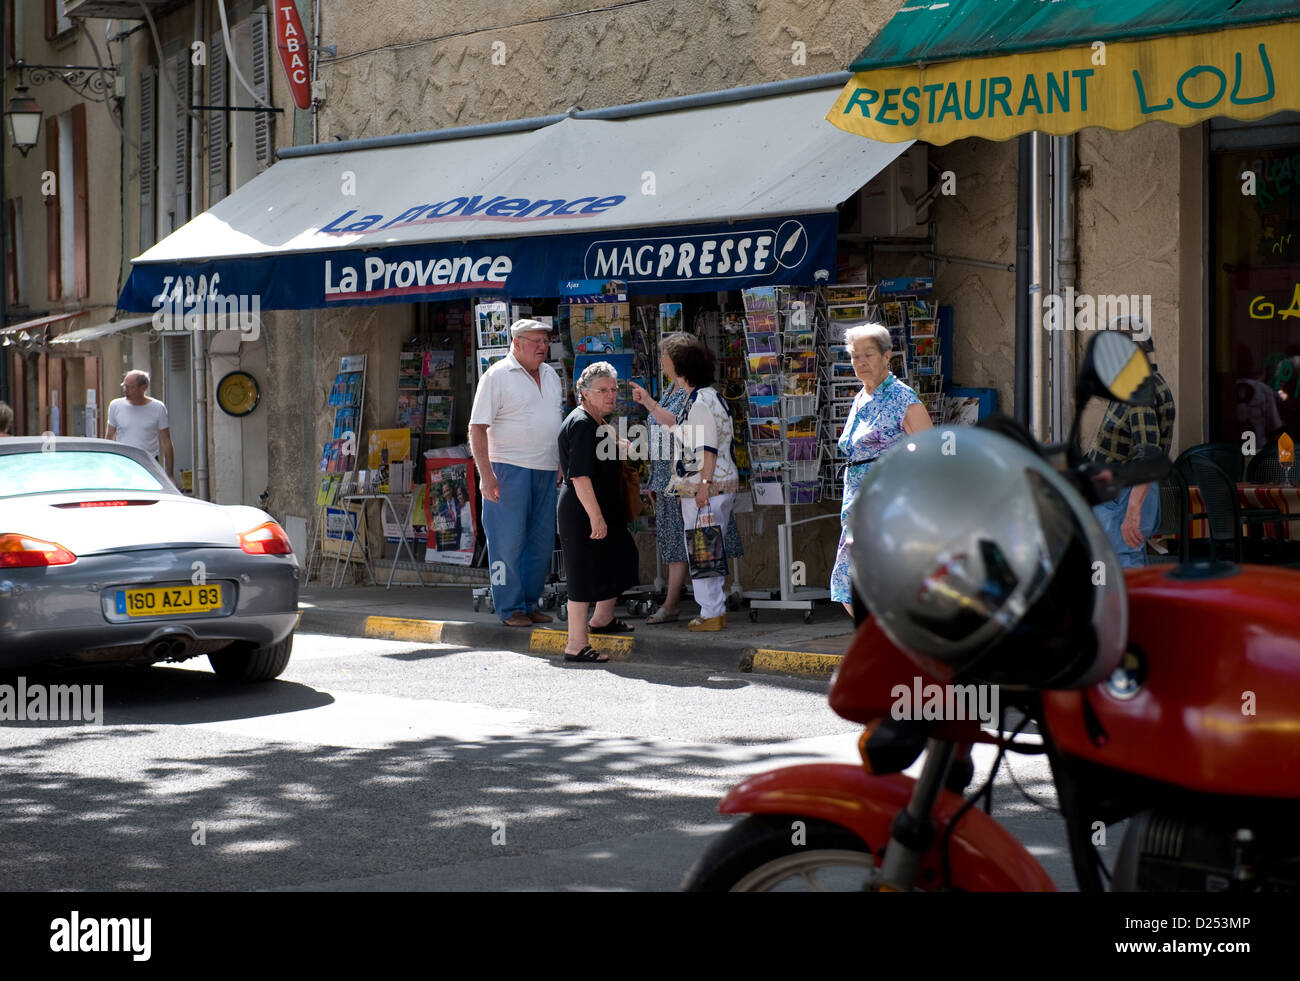 Valensole, France, people in front of a newsstand and gift shop Stock Photo